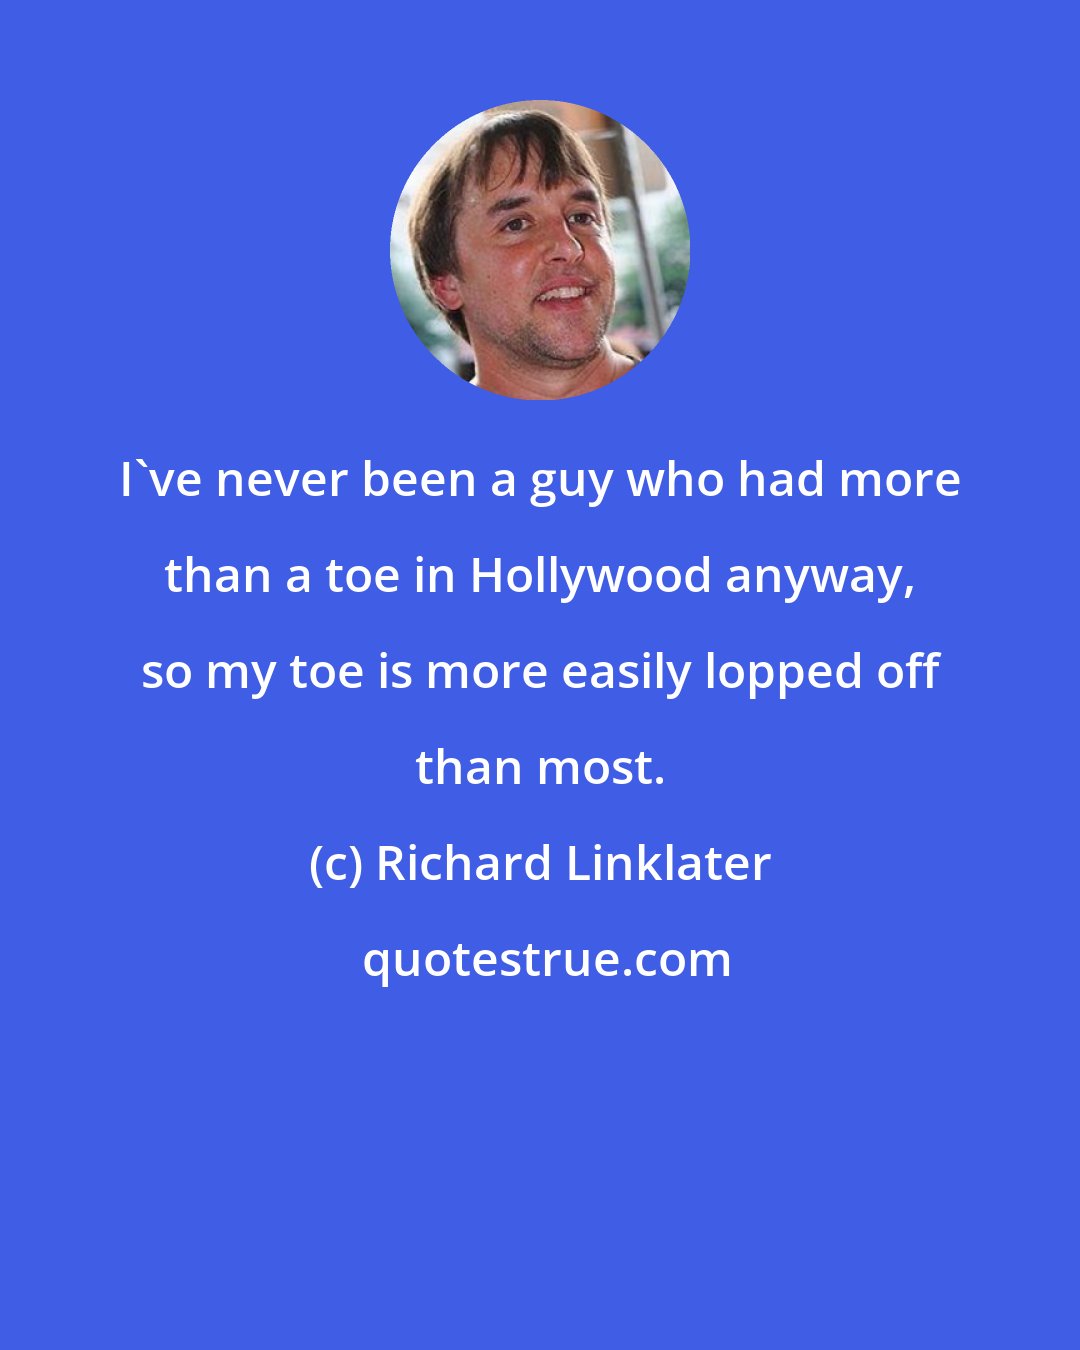 Richard Linklater: I've never been a guy who had more than a toe in Hollywood anyway, so my toe is more easily lopped off than most.